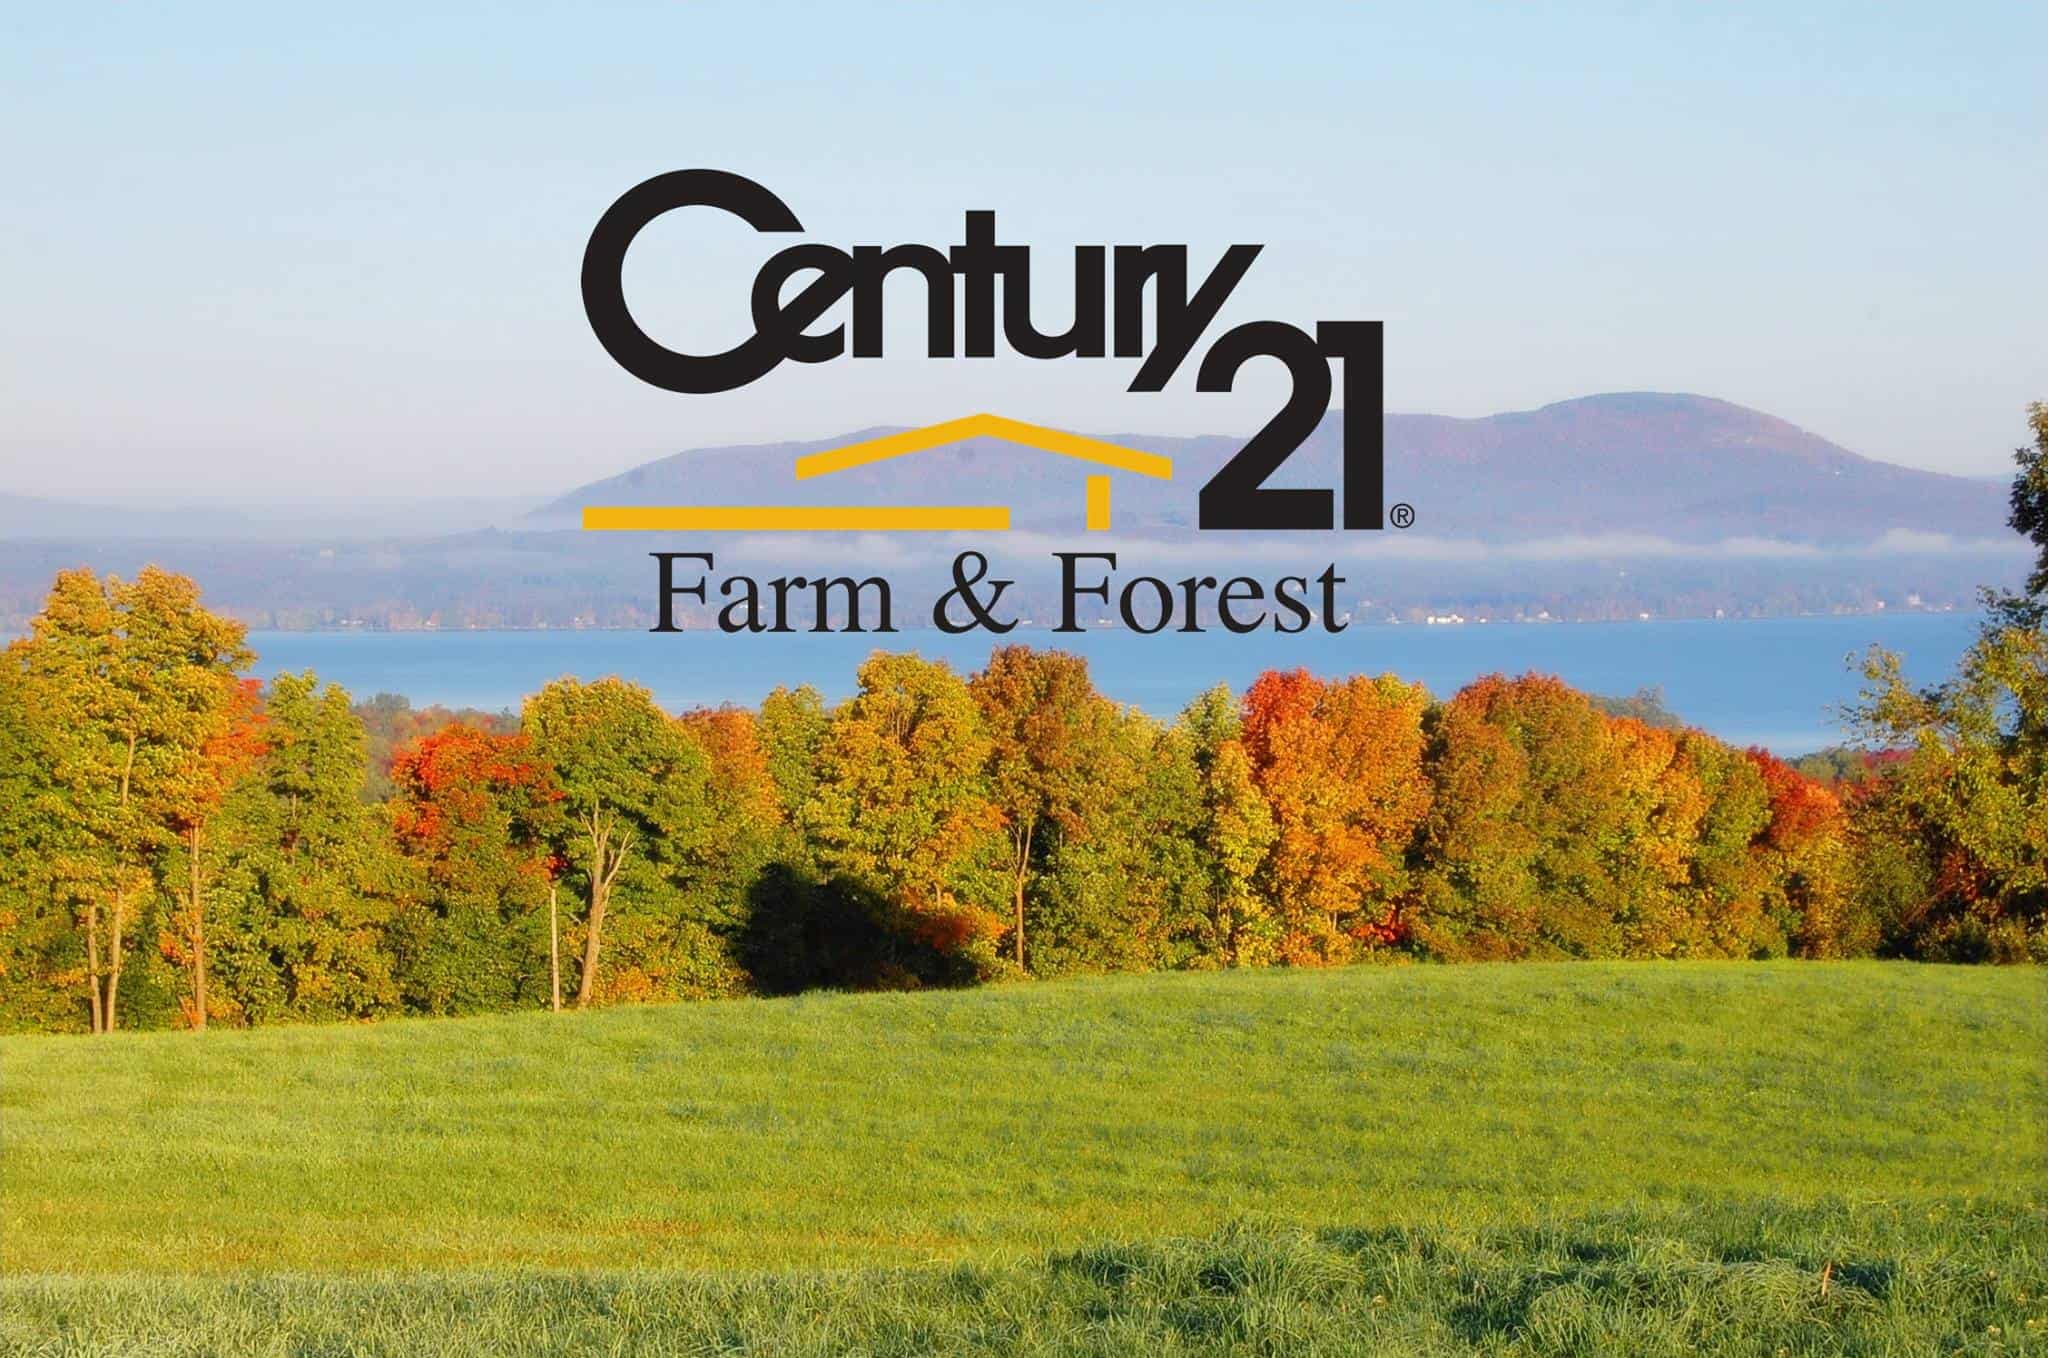 Century 21 Farm & Forest Realty - Fall Lake & Mountains with Logo